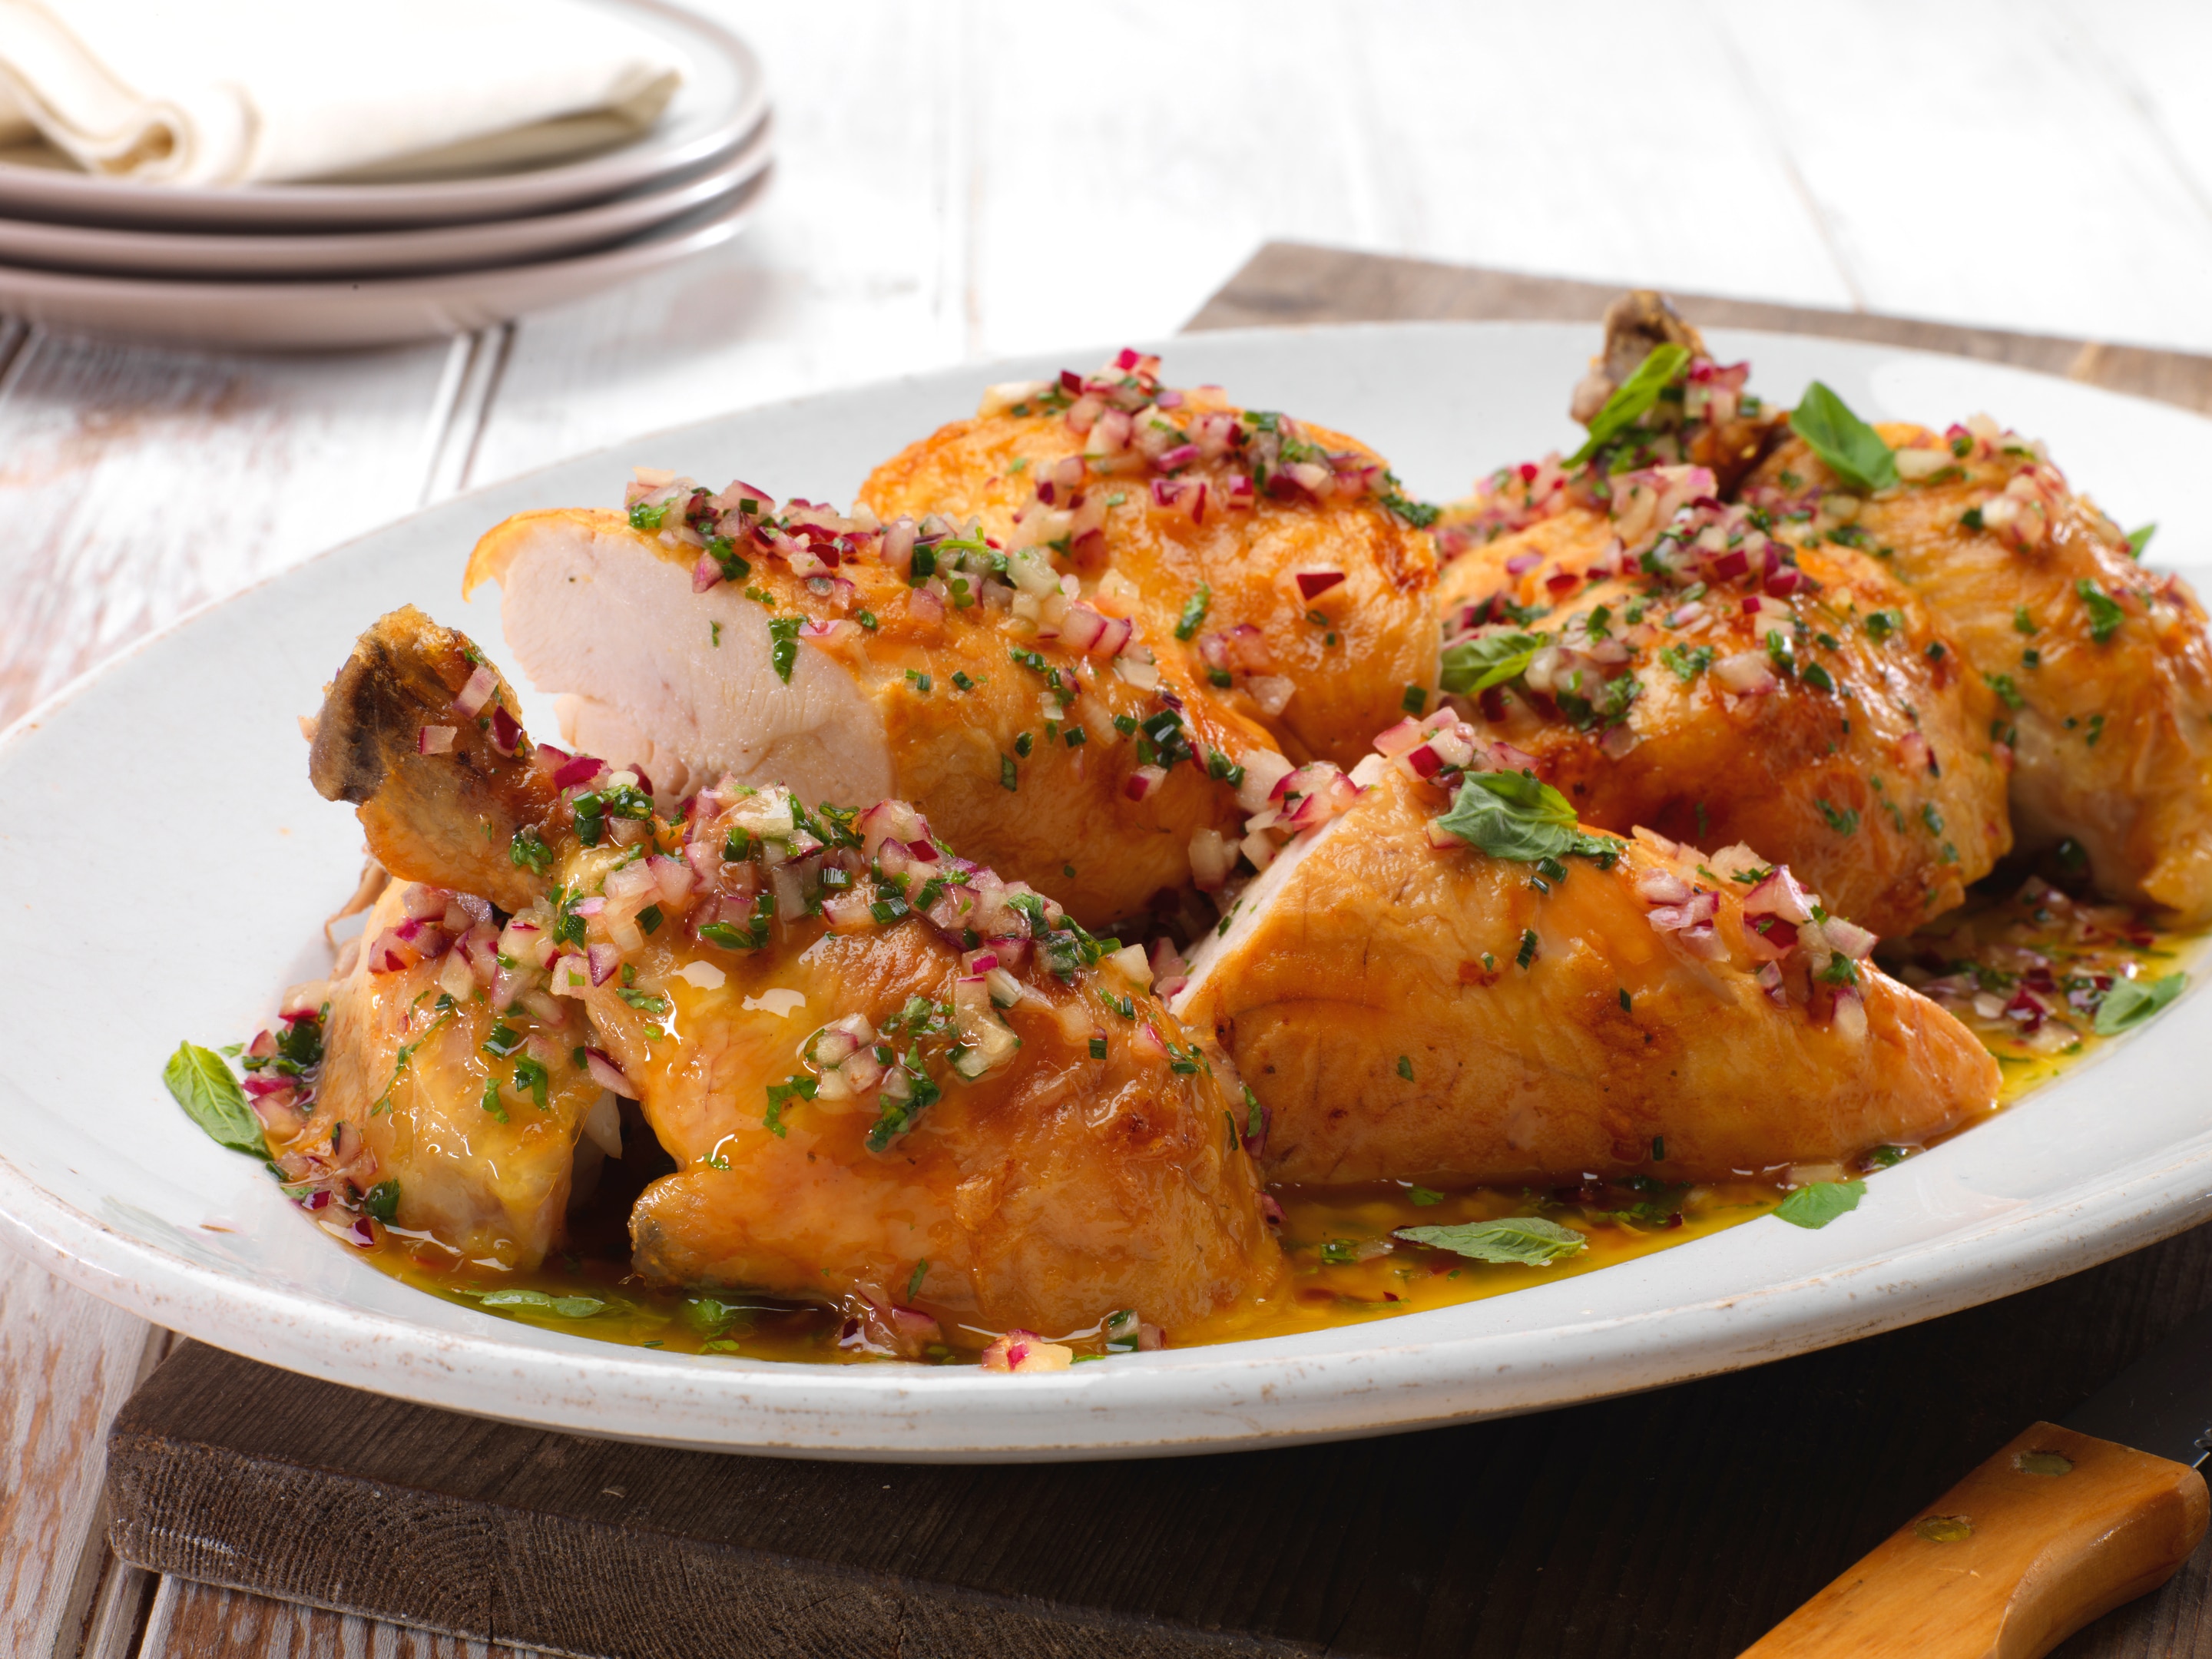 Roast chicken with vinaigrette of herbs and red onions